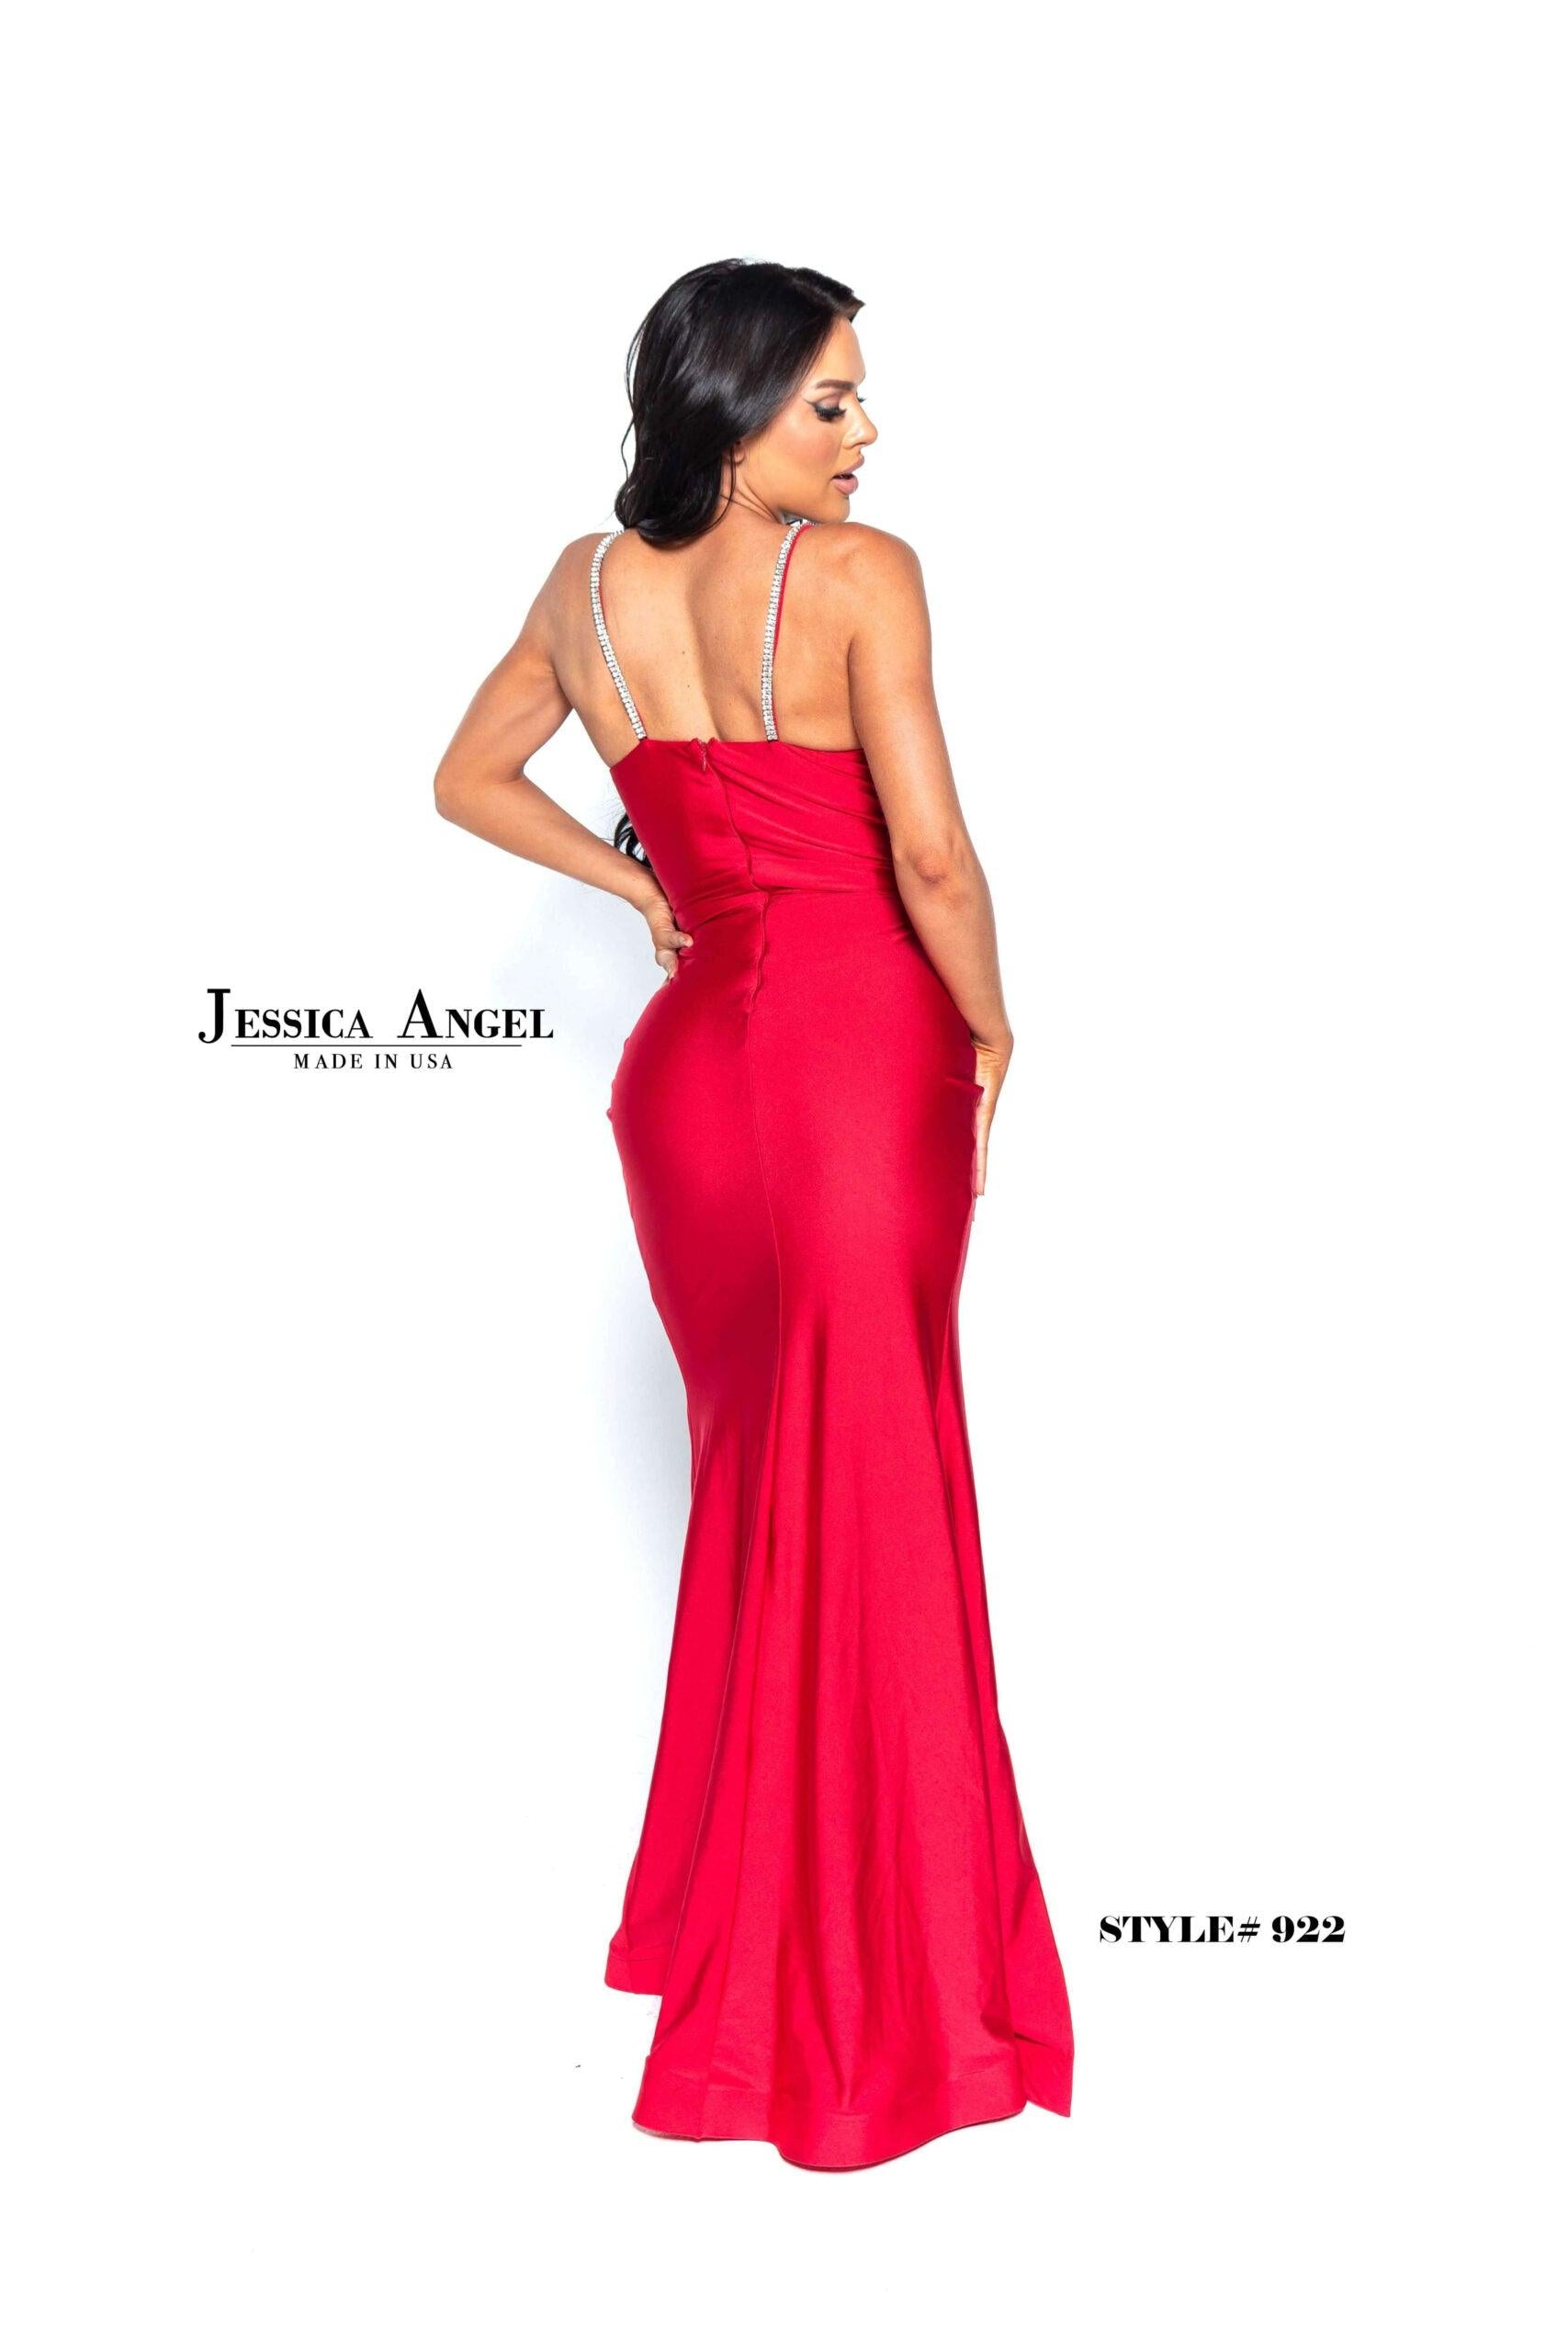 Jessica Angel Spaghetti Strap Long Formal Dress 922 - The Dress Outlet